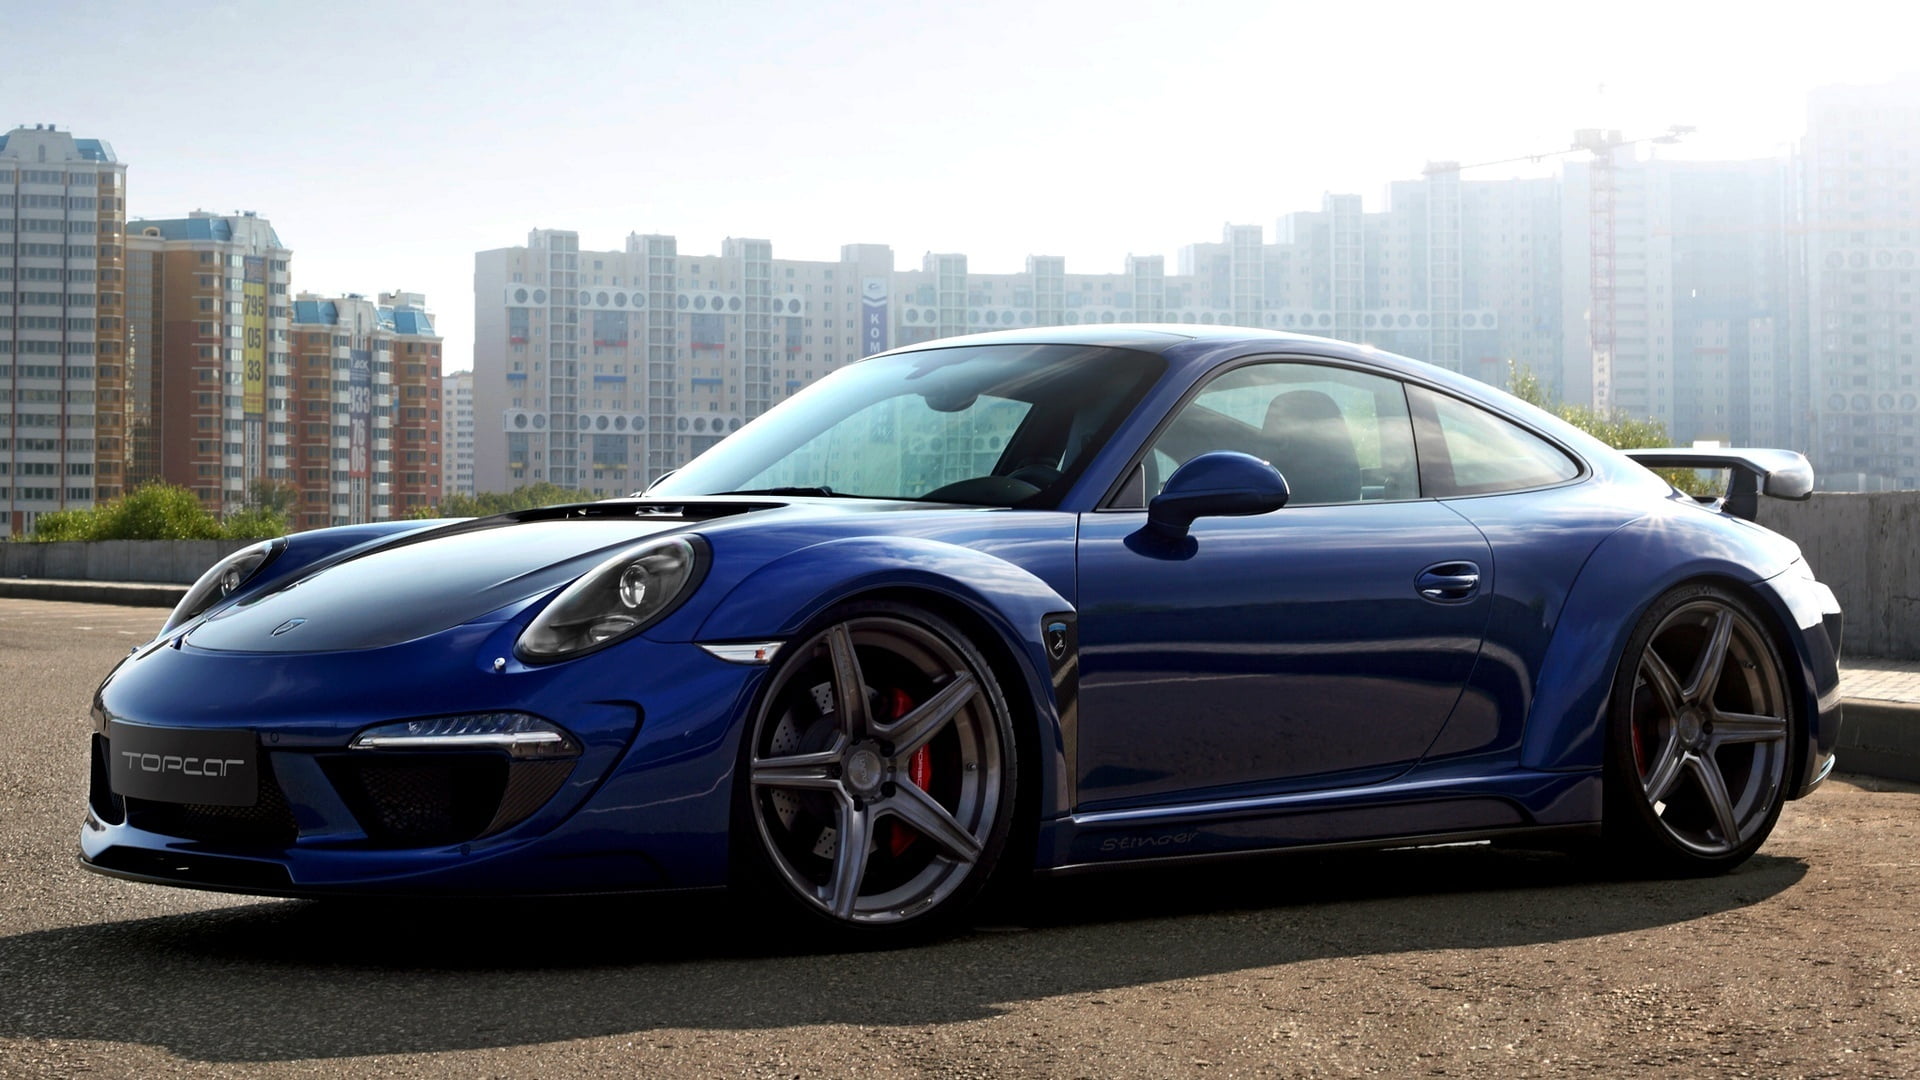 blue Porsche 911 parked on brown soil with view of high-rise building